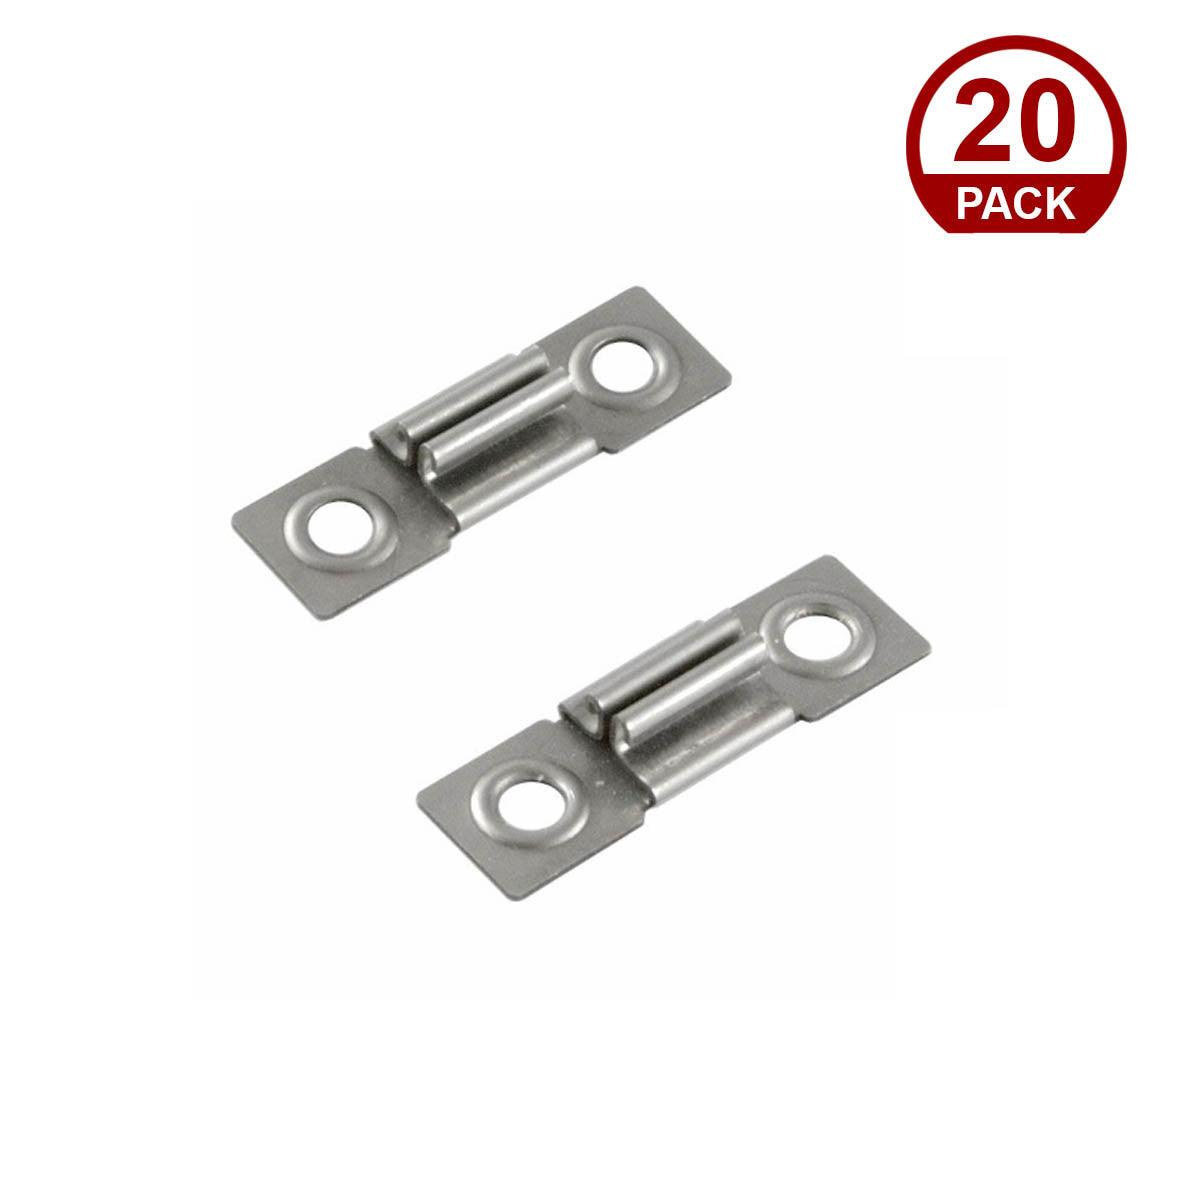 Chromapath Standard Mounting Clips for Square, 45°, and DUO Channels, Pack of 20 - Bees Lighting